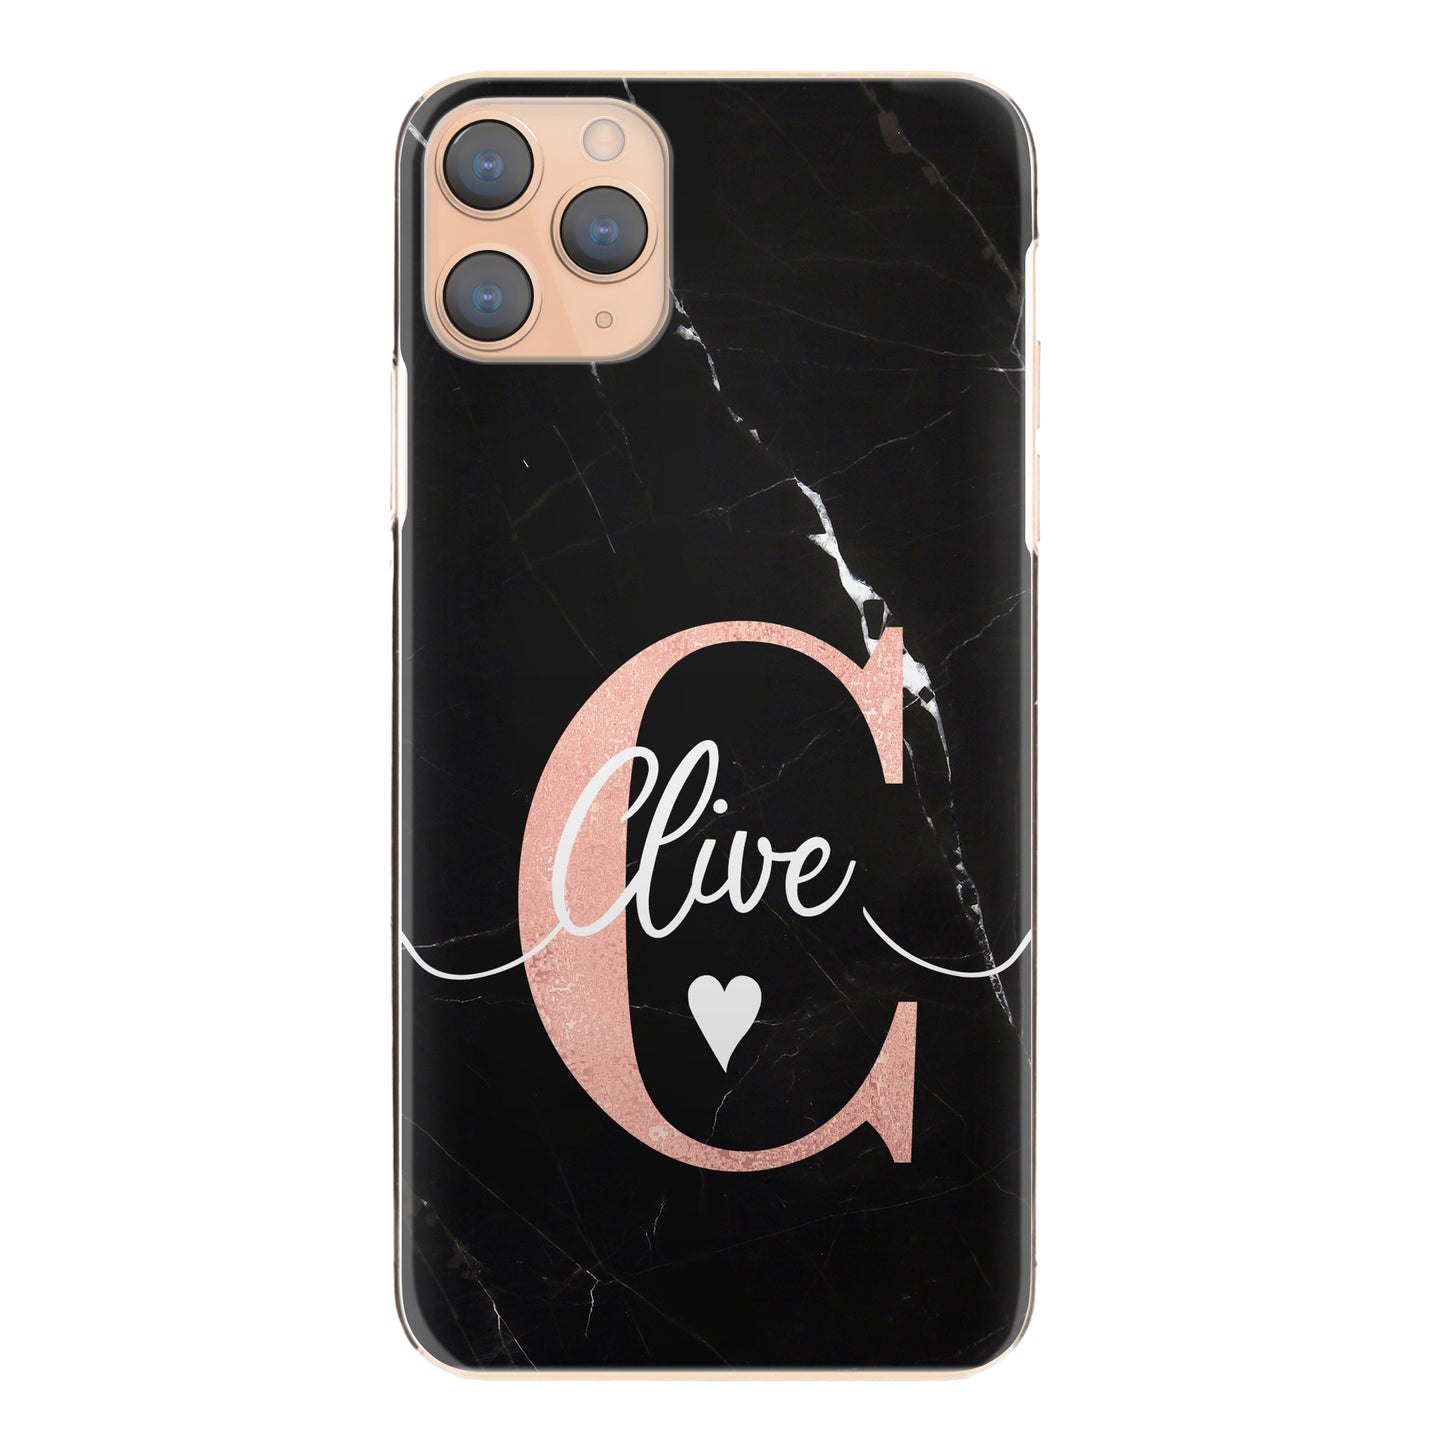 Personalised Motorola Phone Hard Case with Stylish Heart Text and Pink Initial on White Infused Black Marble